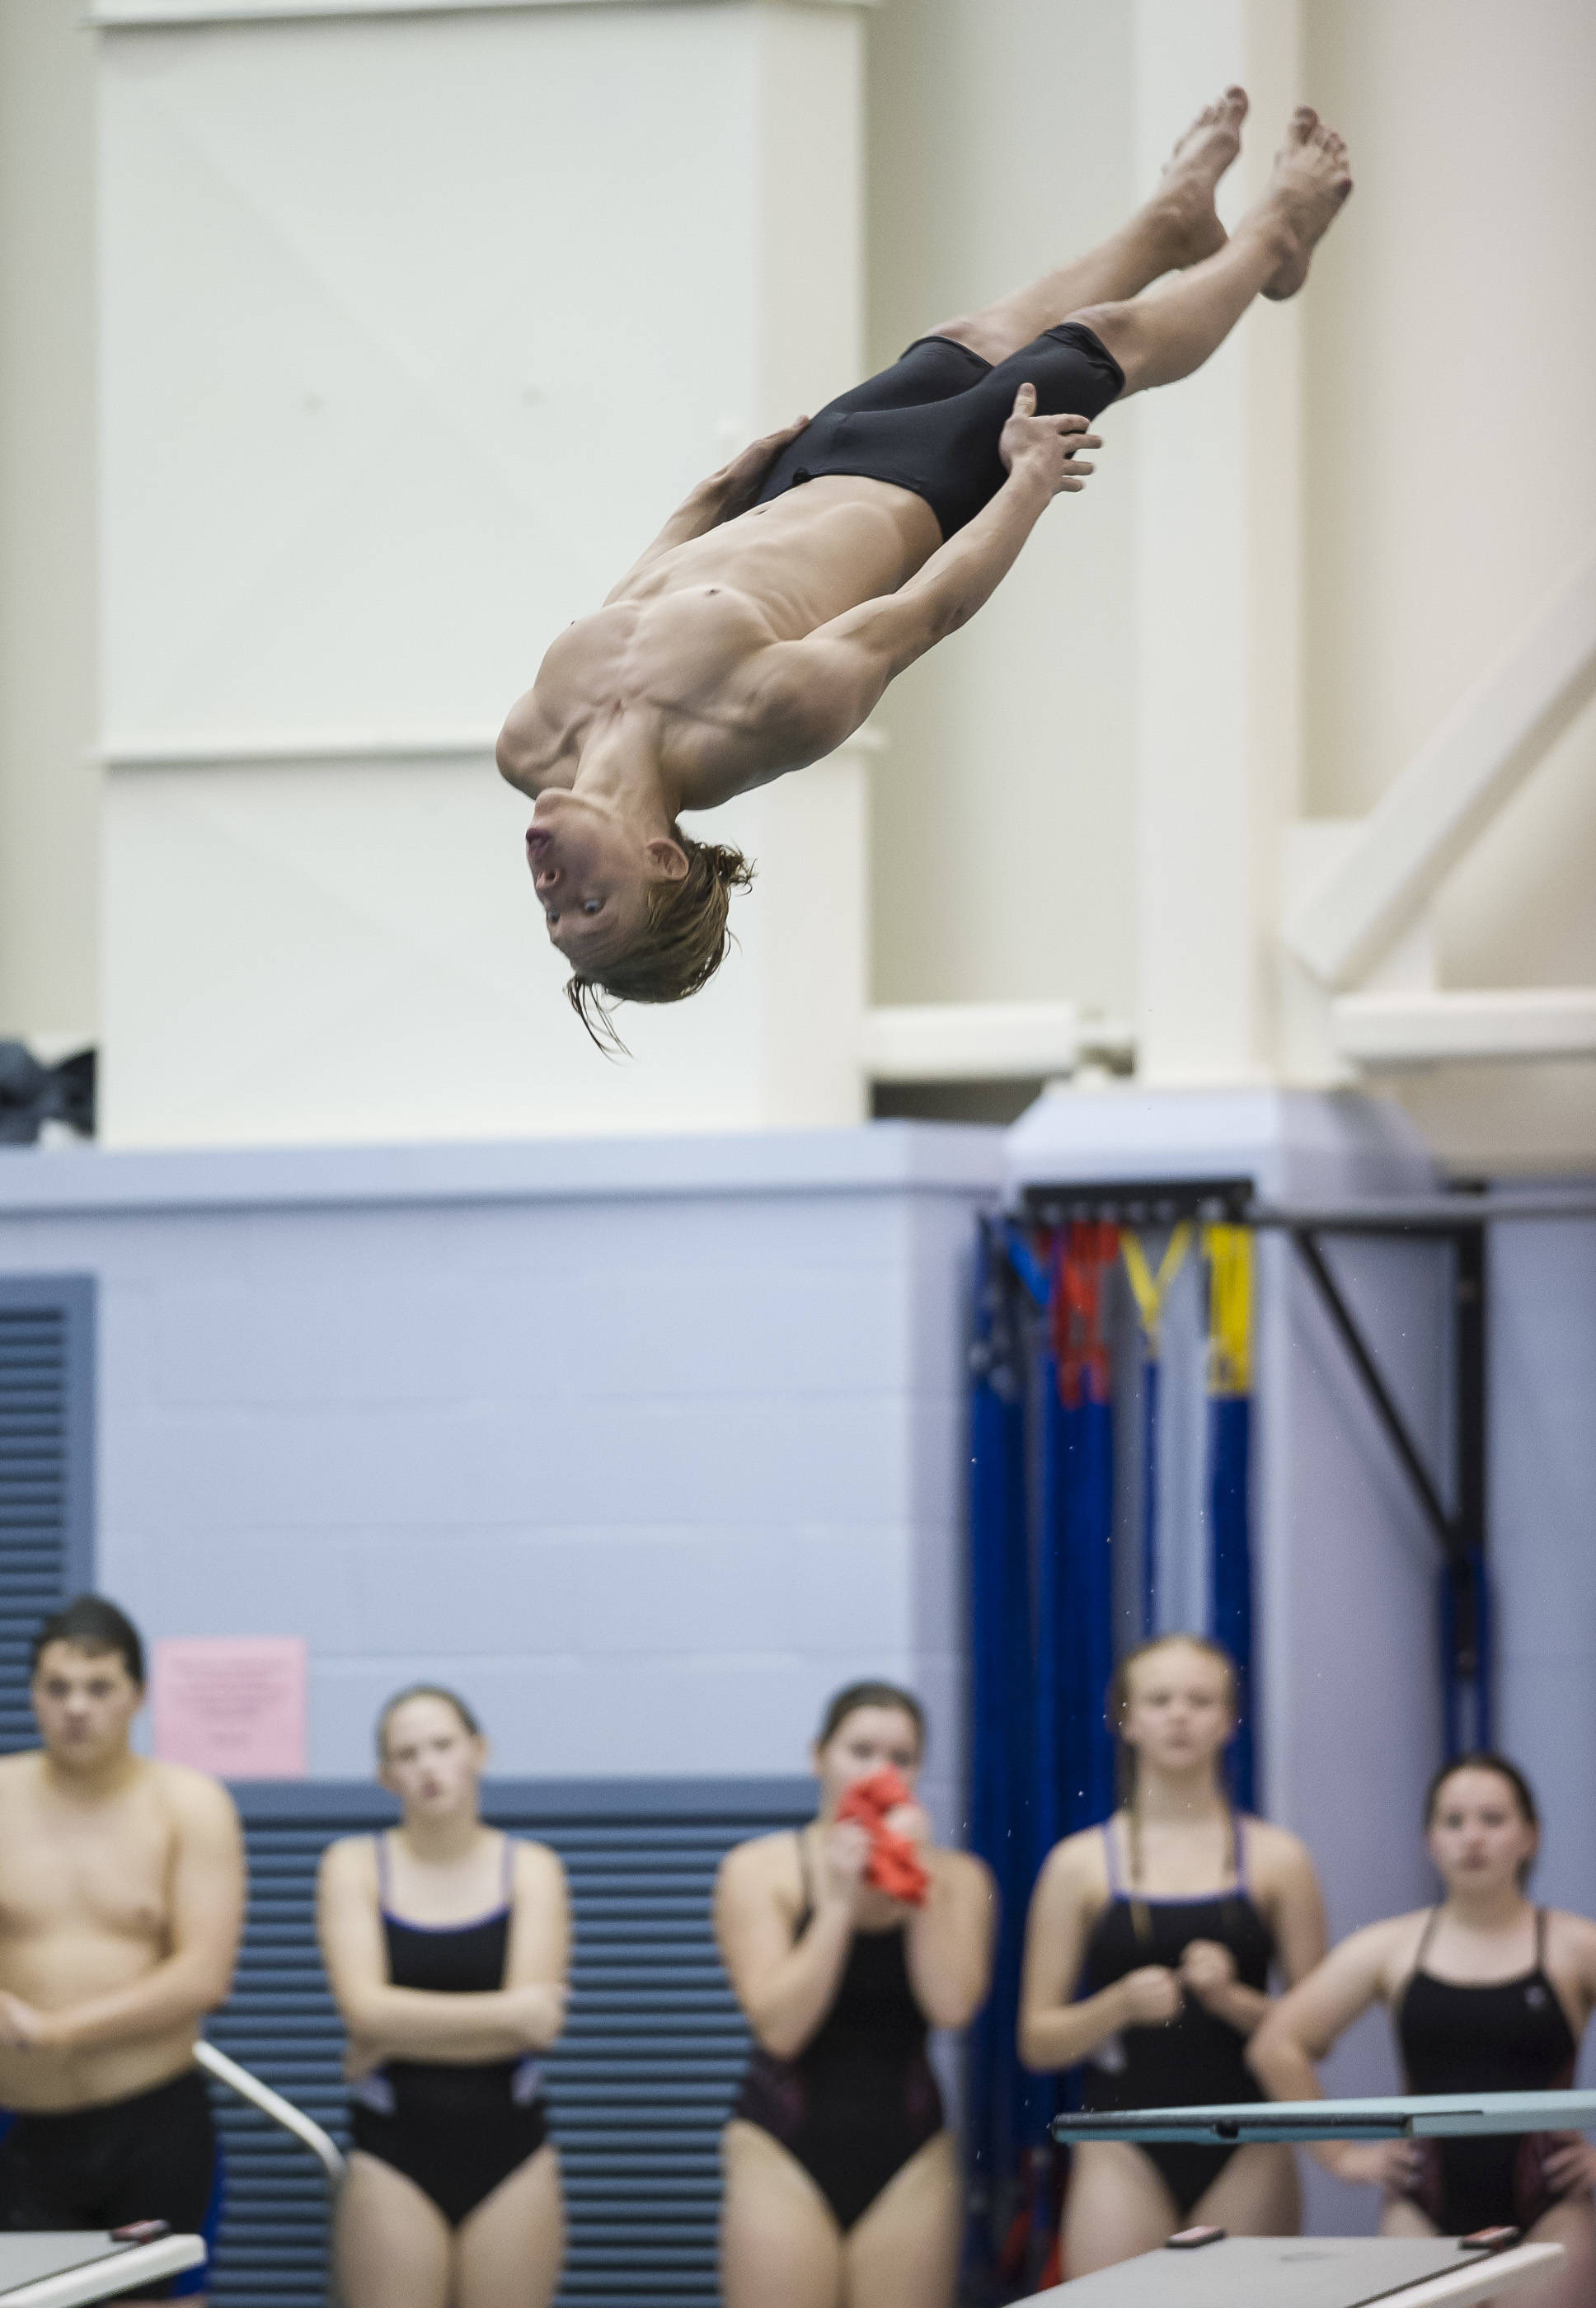 Will Torgerson of Juneau-Douglas dives at the Southeast Alaska Regional Swim and Dive Championships at Thunder Mountain High School on Friday, Oct. 27, 2017. (Michael Penn | Juneau Empire)